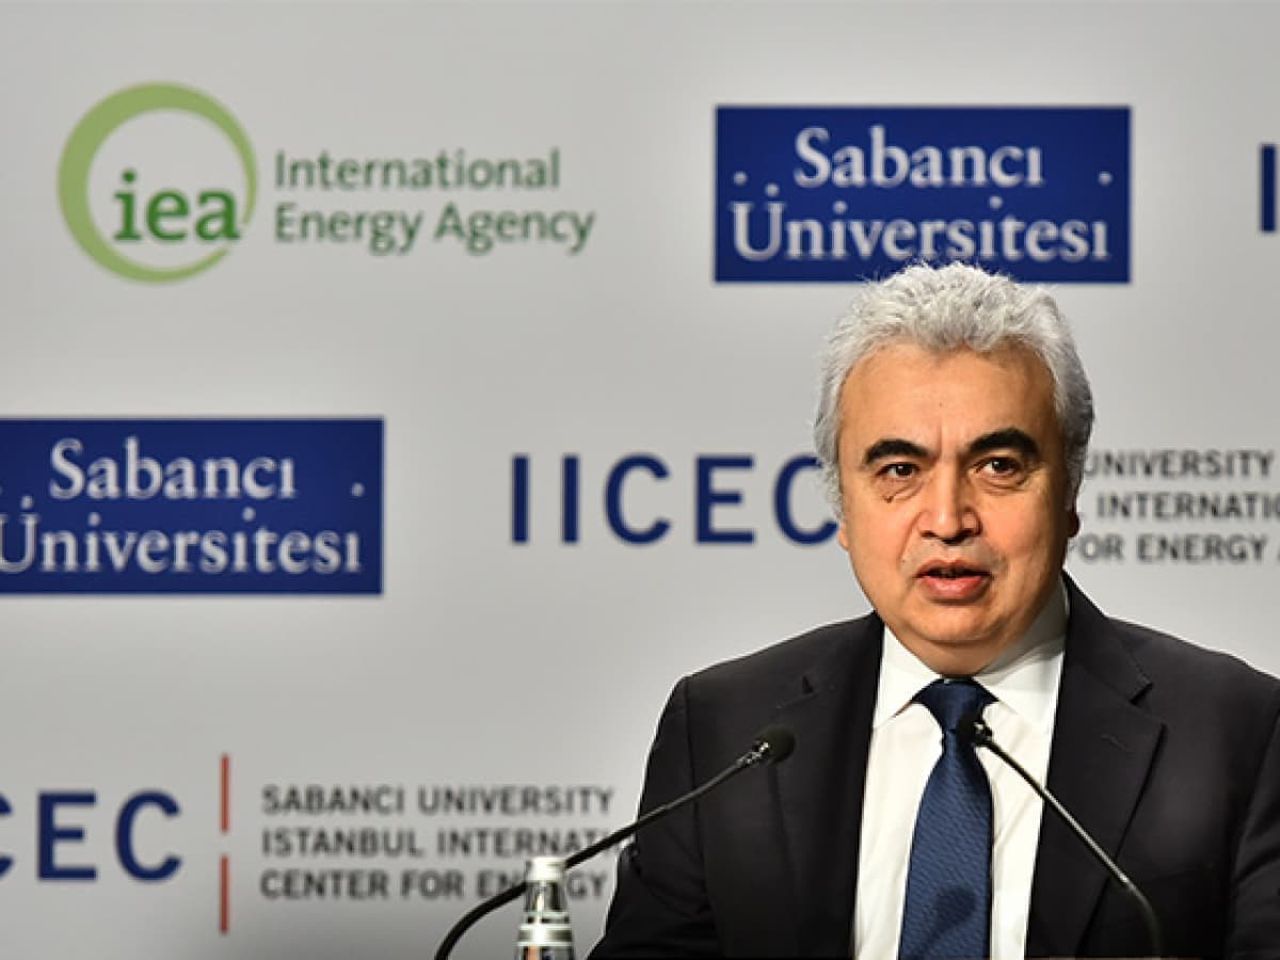 Renewed investor pressure for IEA over climate change. Image via Reuters.